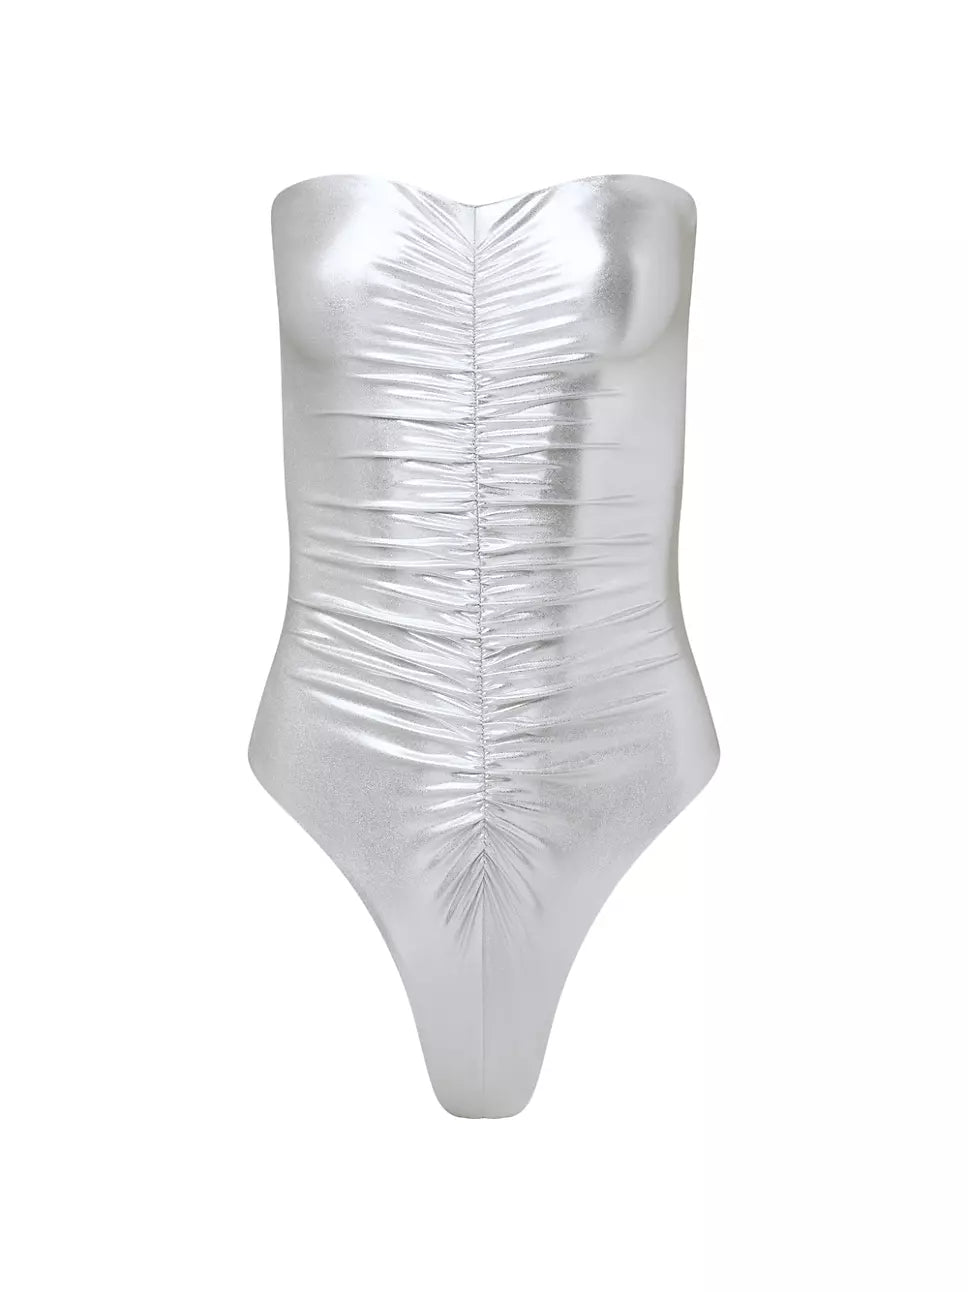 WeWoreWhat- Strapless Ruched One Piece